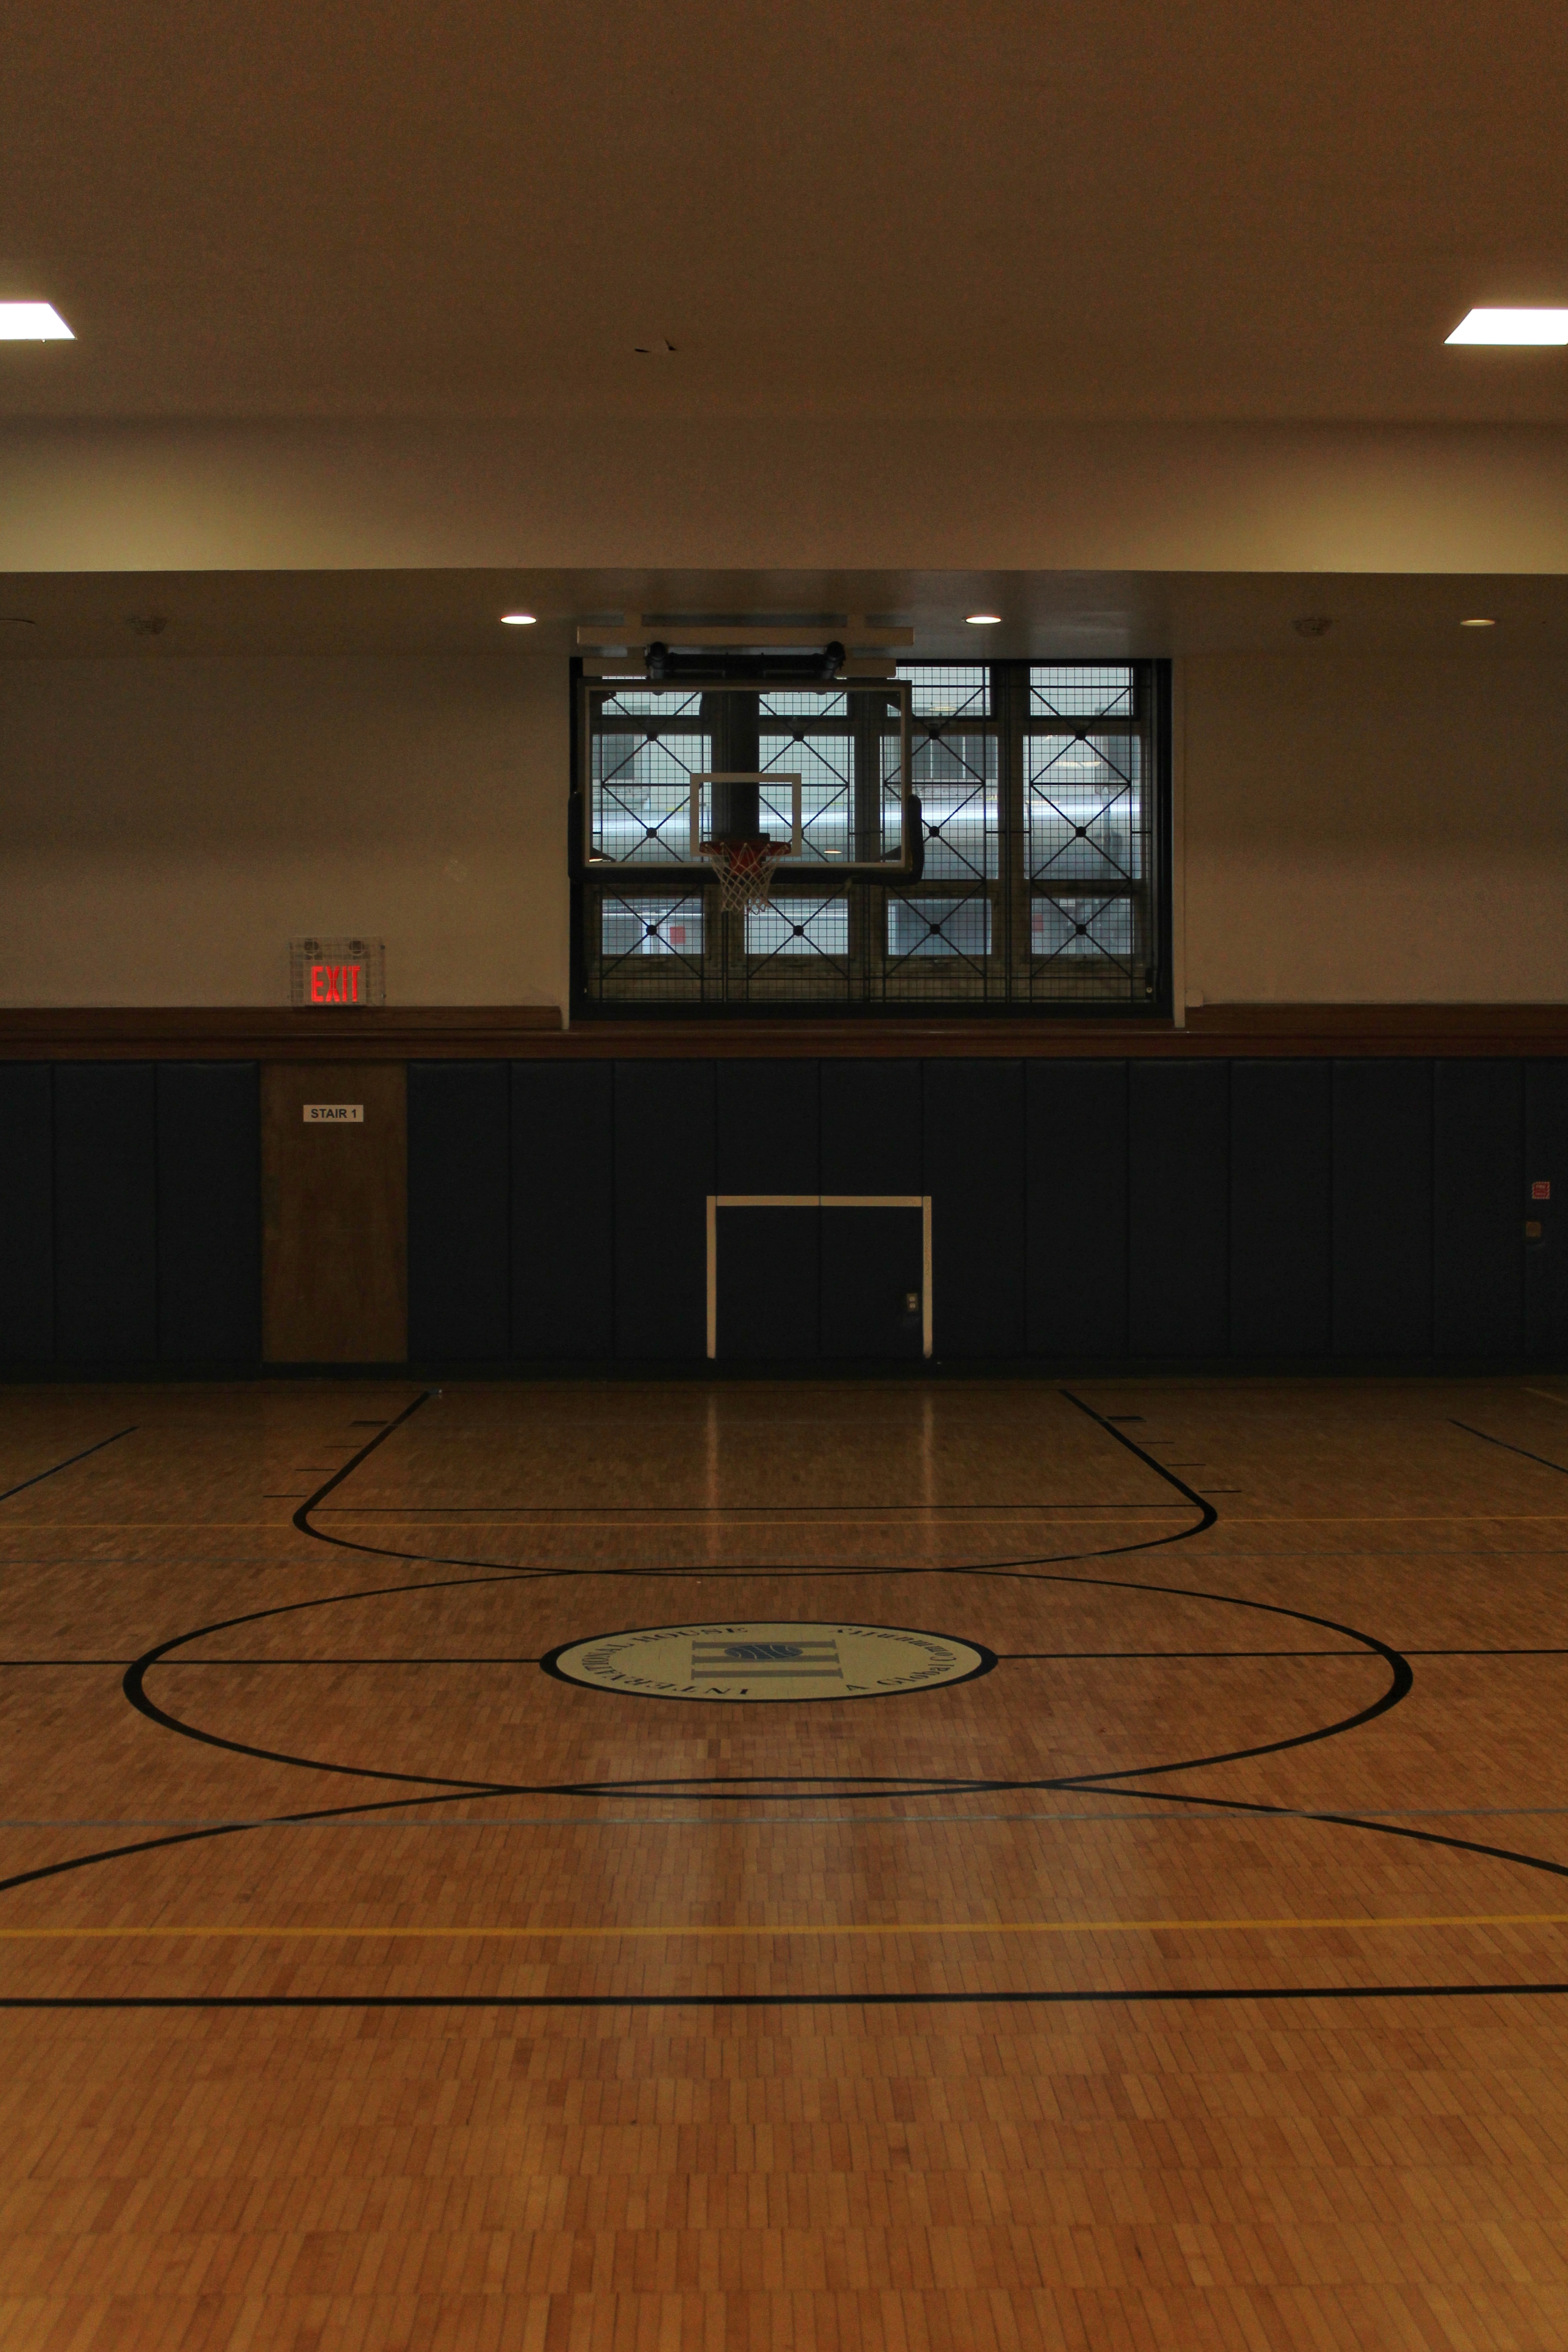 A hardwood basketball court with a football (soccer) goal cut-out in the wall. 